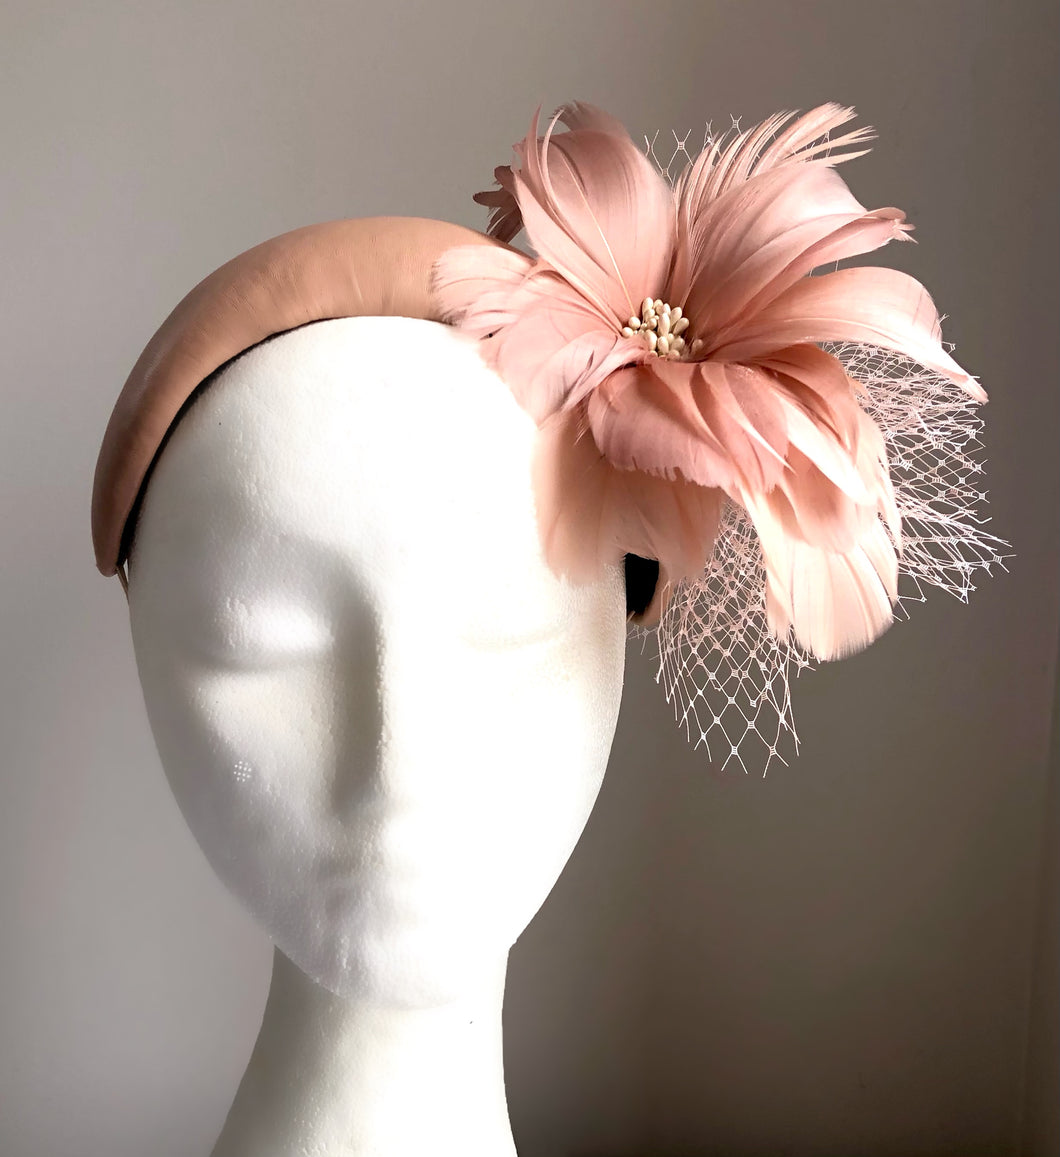 Nell - Latte Leather & Feather Fascinator - MM421